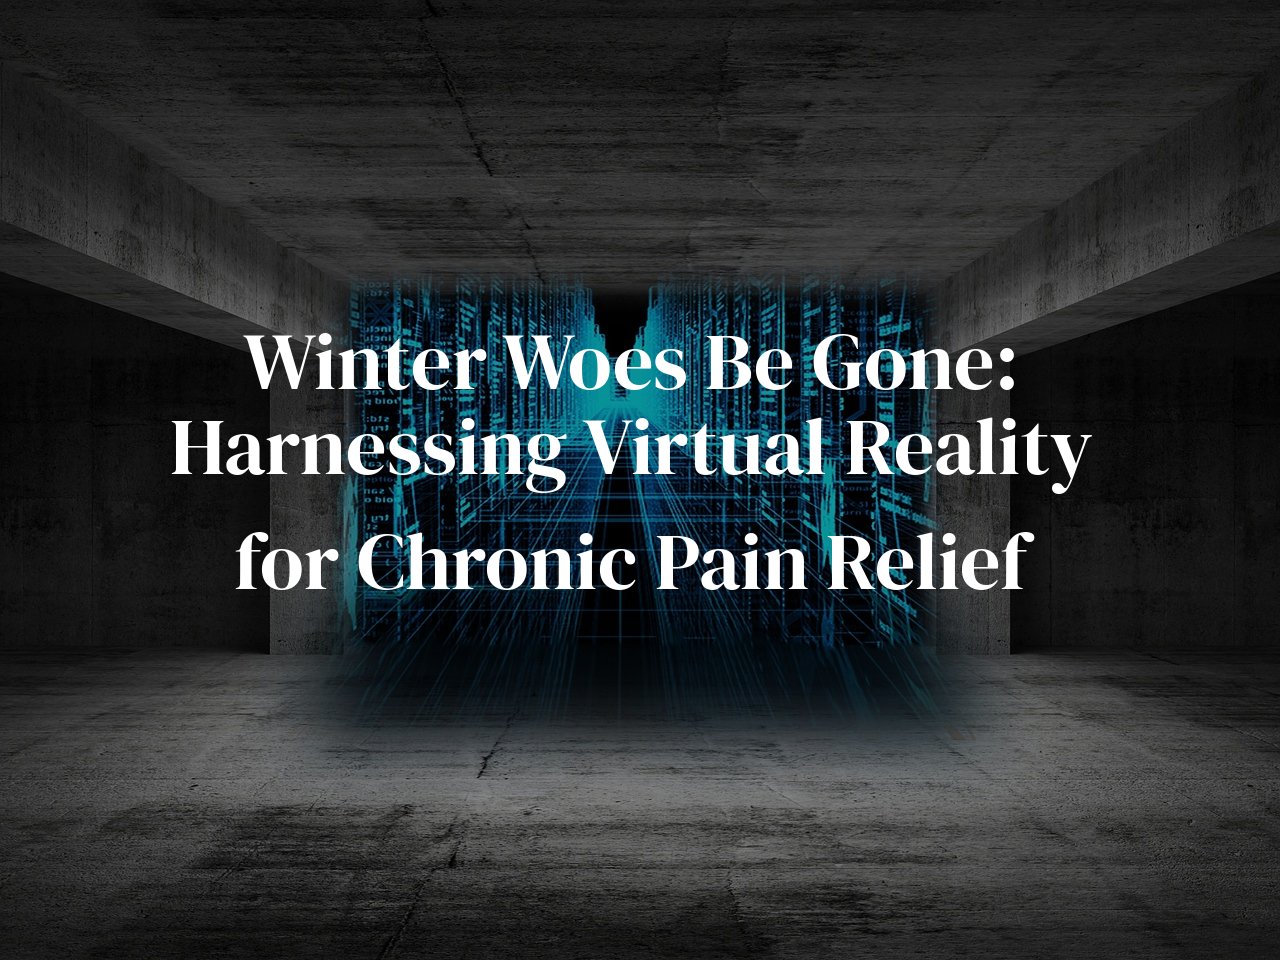 Winter Woes Be Gone: Harnessing Virtual Reality for Chronic Pain Relief